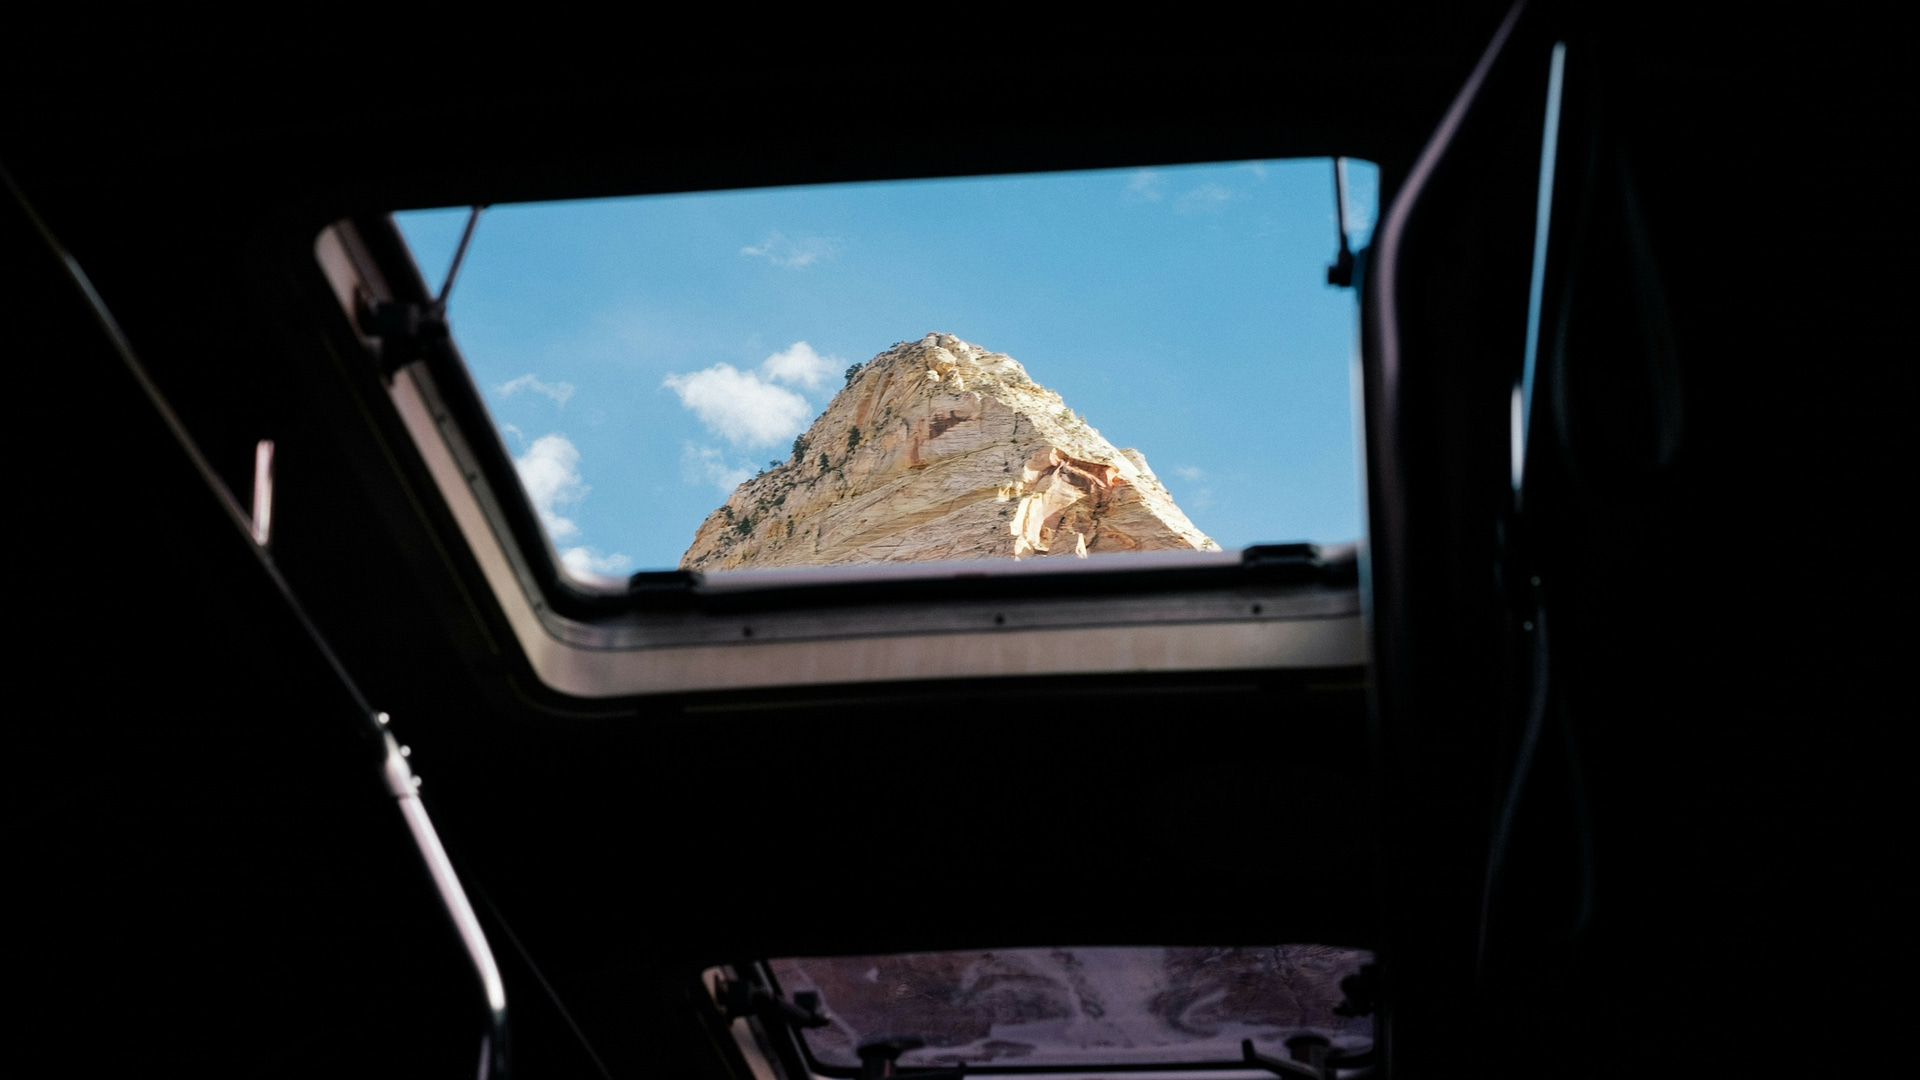 Photo looking up through ceiling windows in an RV at a rock formation in Zion National Park. Photo by PJ Gal.